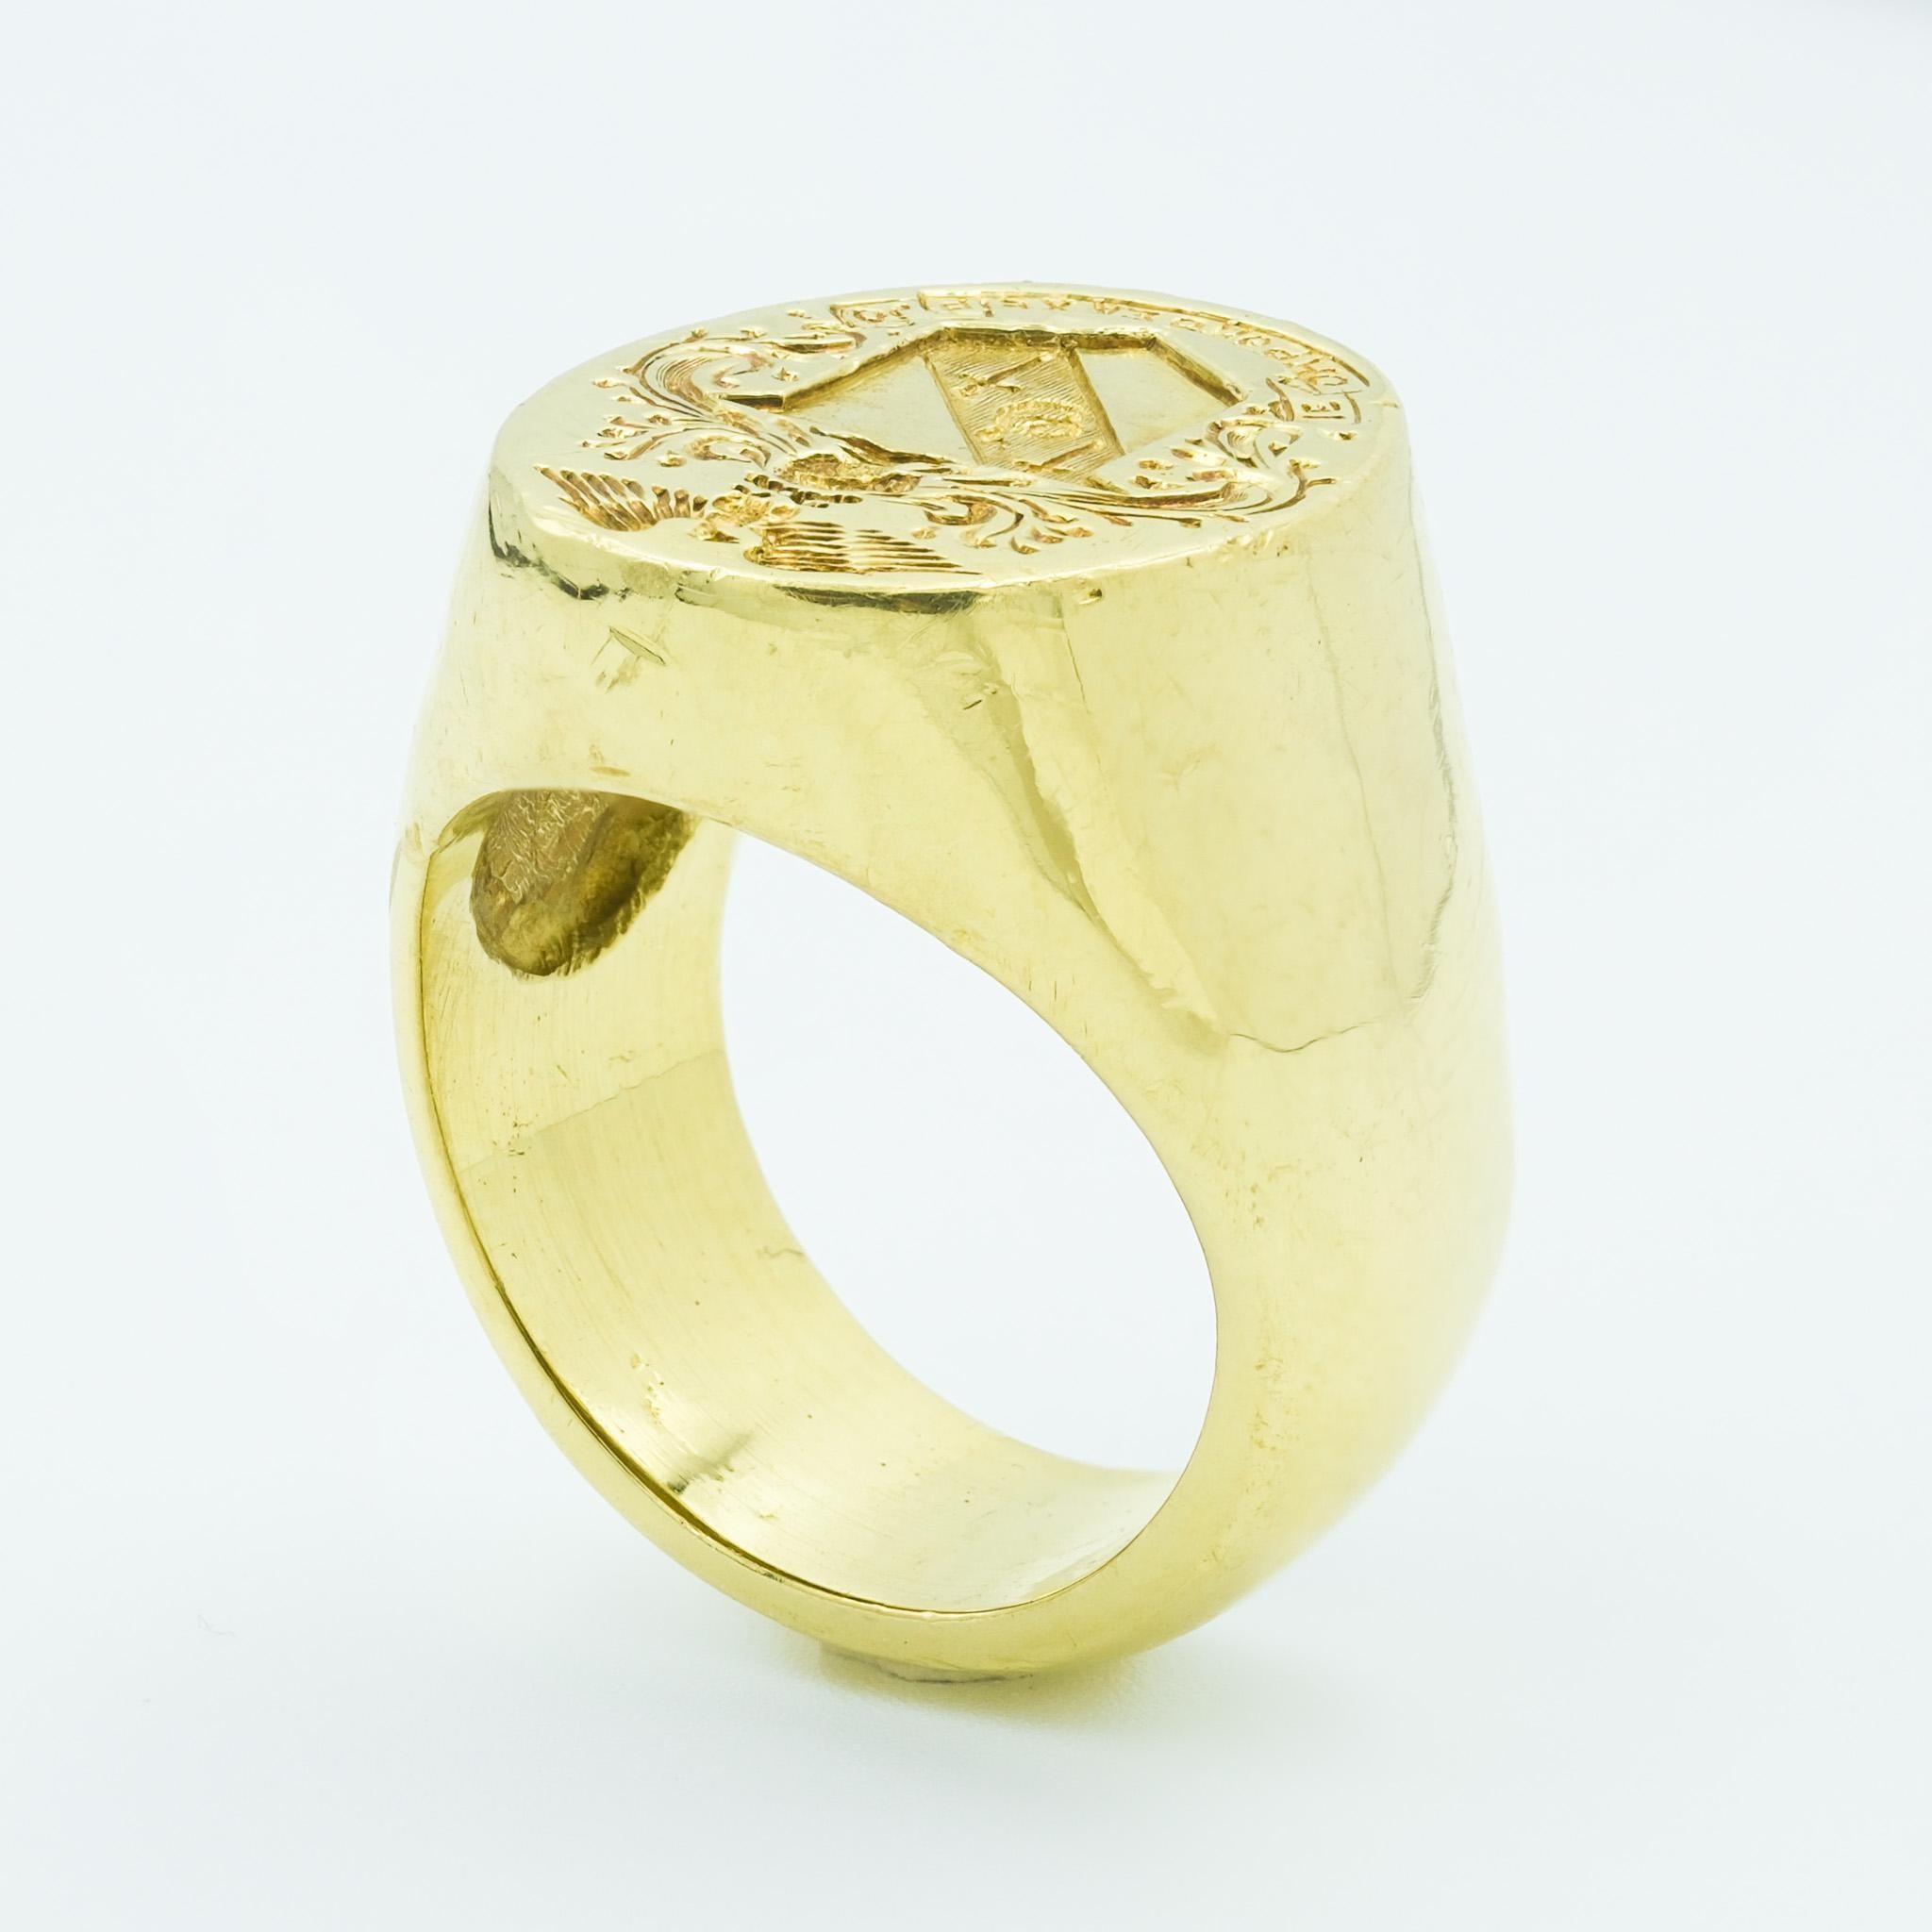 This robust 18 karat yellow gold signet ring is a statement of bygone heritage and strength - weighing in at a substantial and hefty 49.1 grams. The ring features a strikingly detailed crest and an eagle in mid-flight, often symbolic of power and